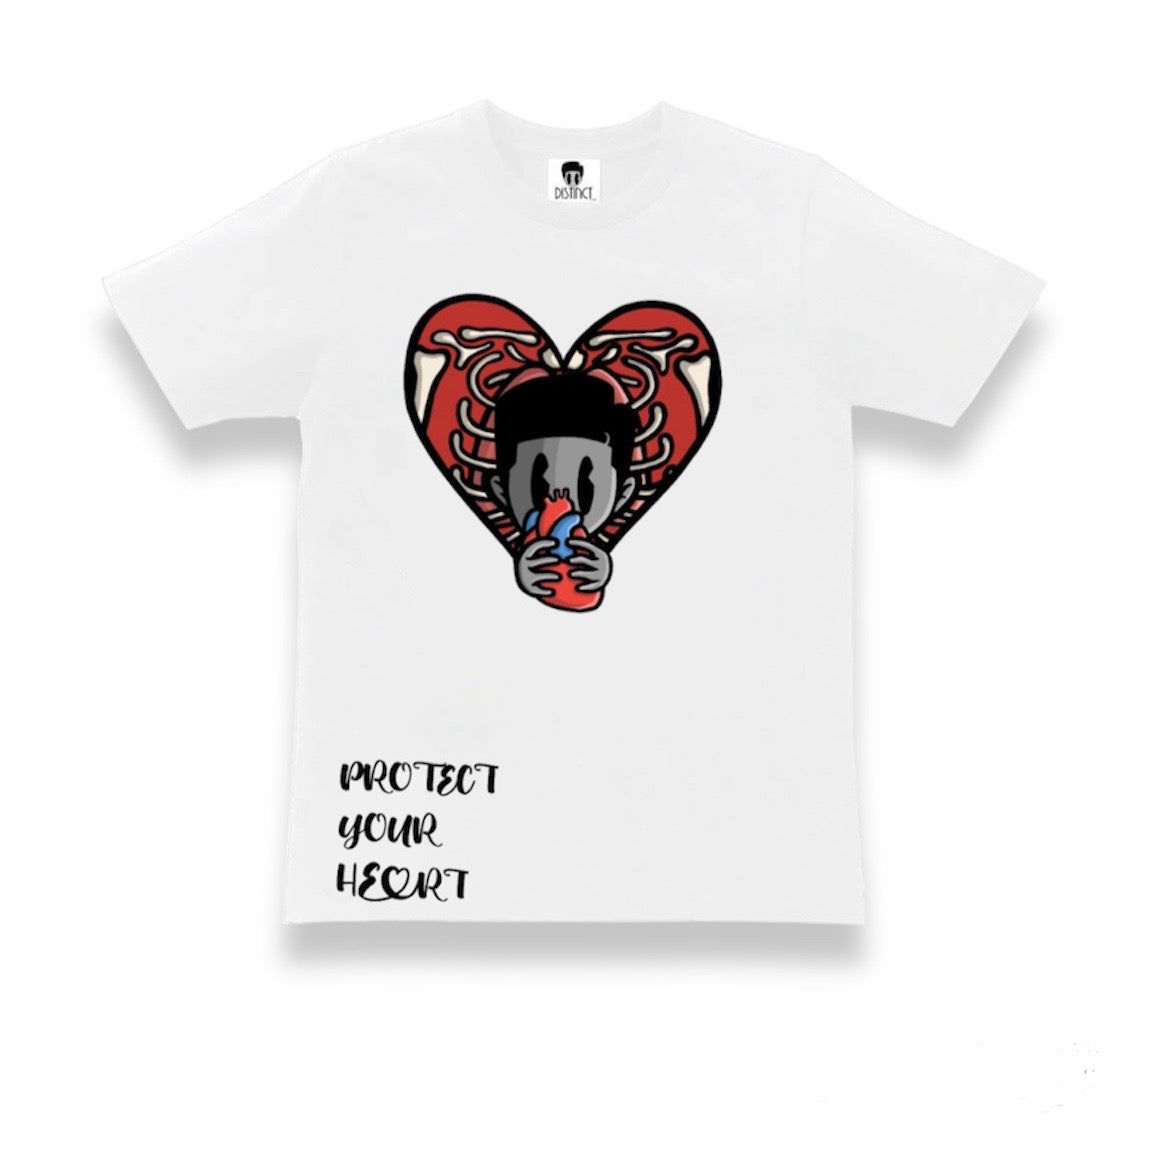 Protect Your Heart Tee